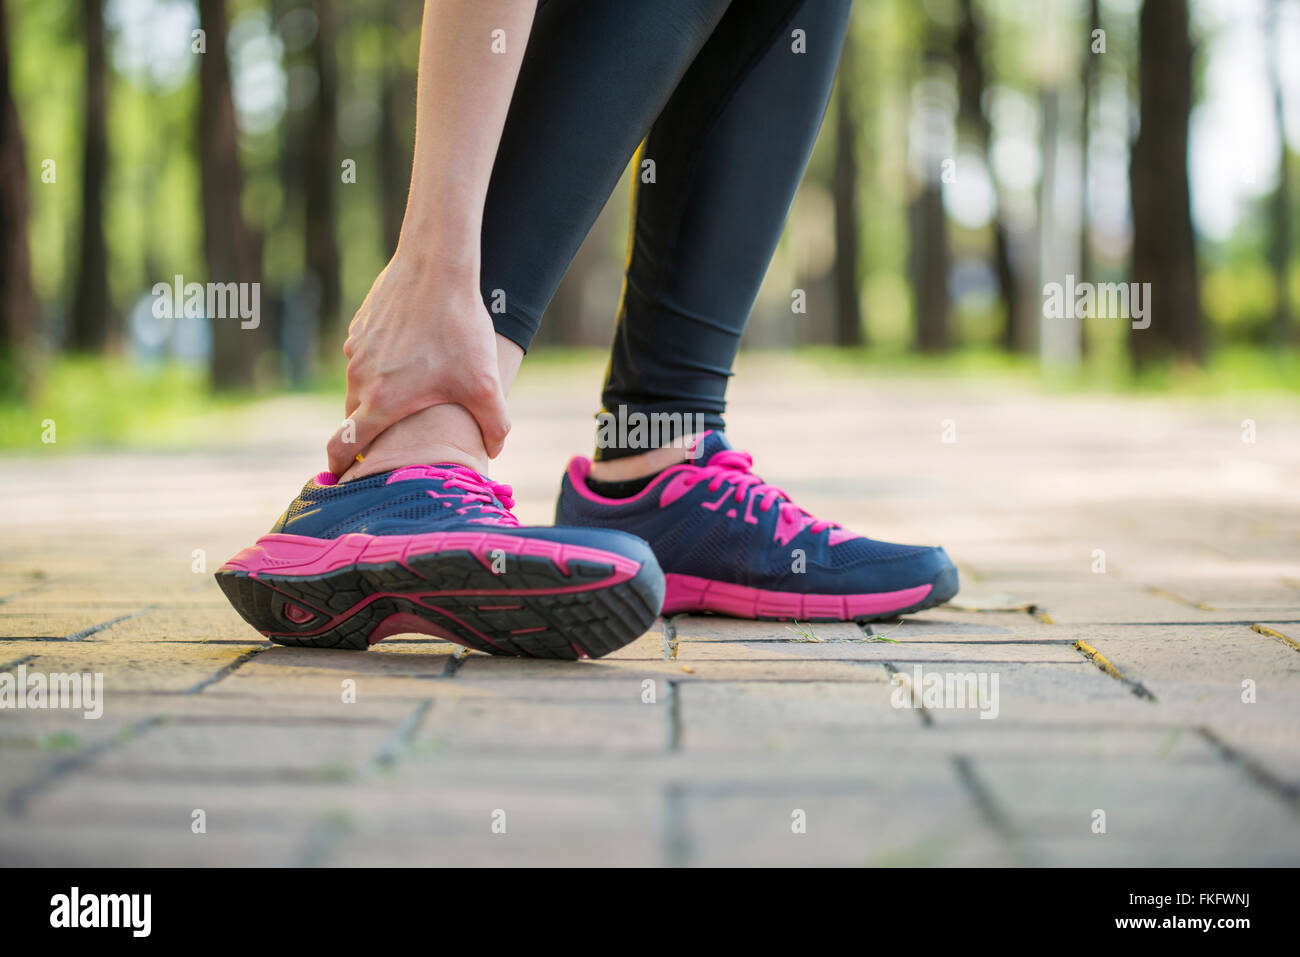 woman runner hold twisted ankle Pain ,Human Leg Cramp Stock Photo